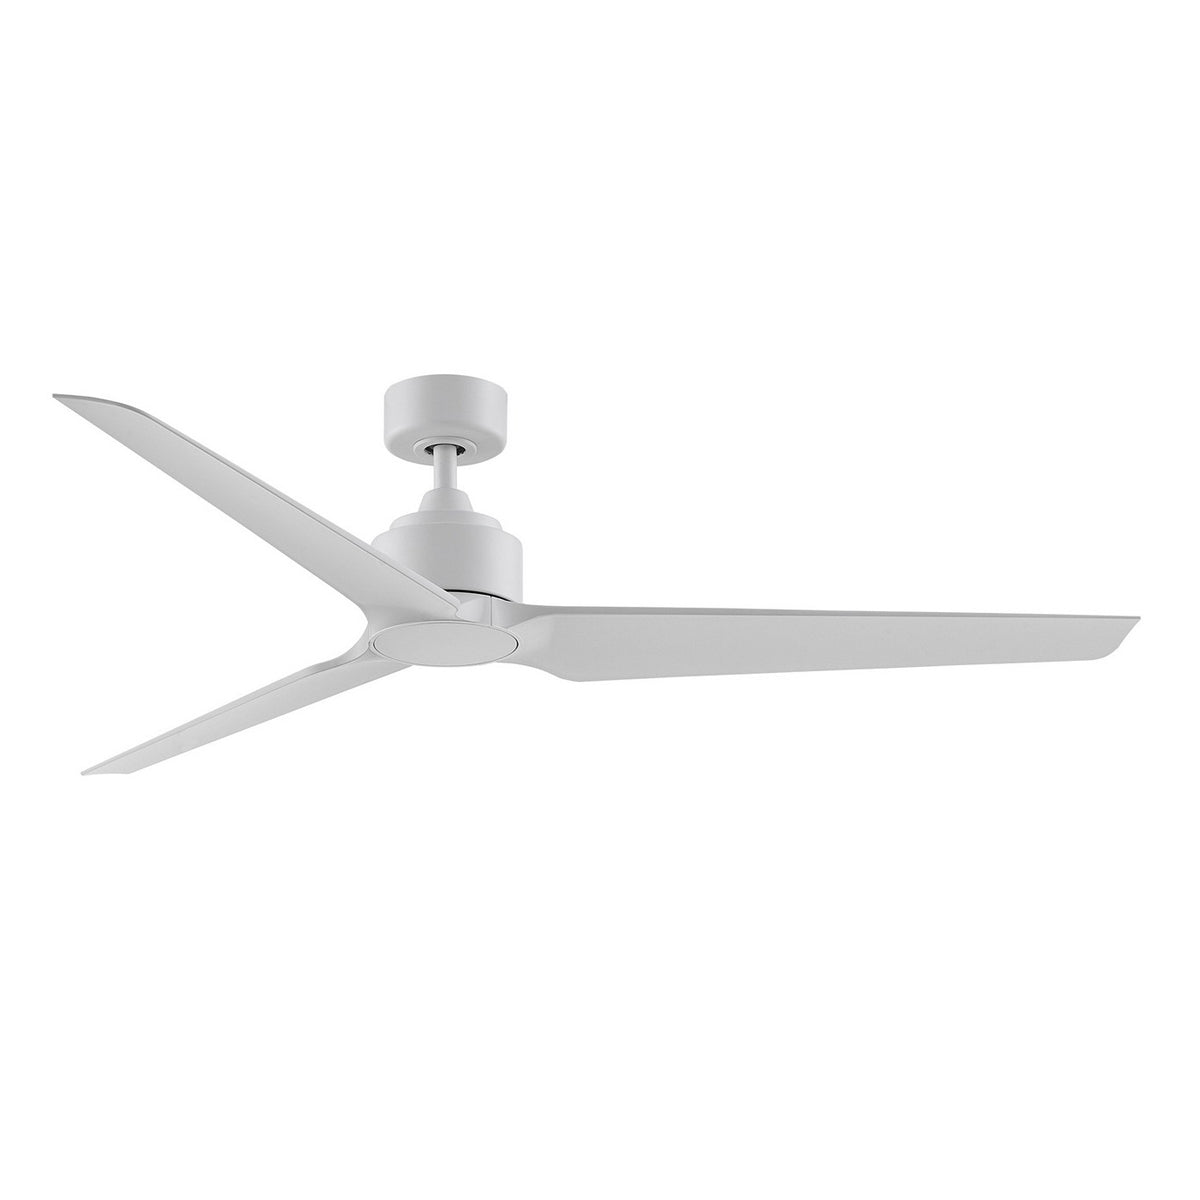 TriAire Custom Outdoor Ceiling Fan Motor With Remote, Set of 3 Blades (64 - 84 Inch) Sold Separately - Bees Lighting